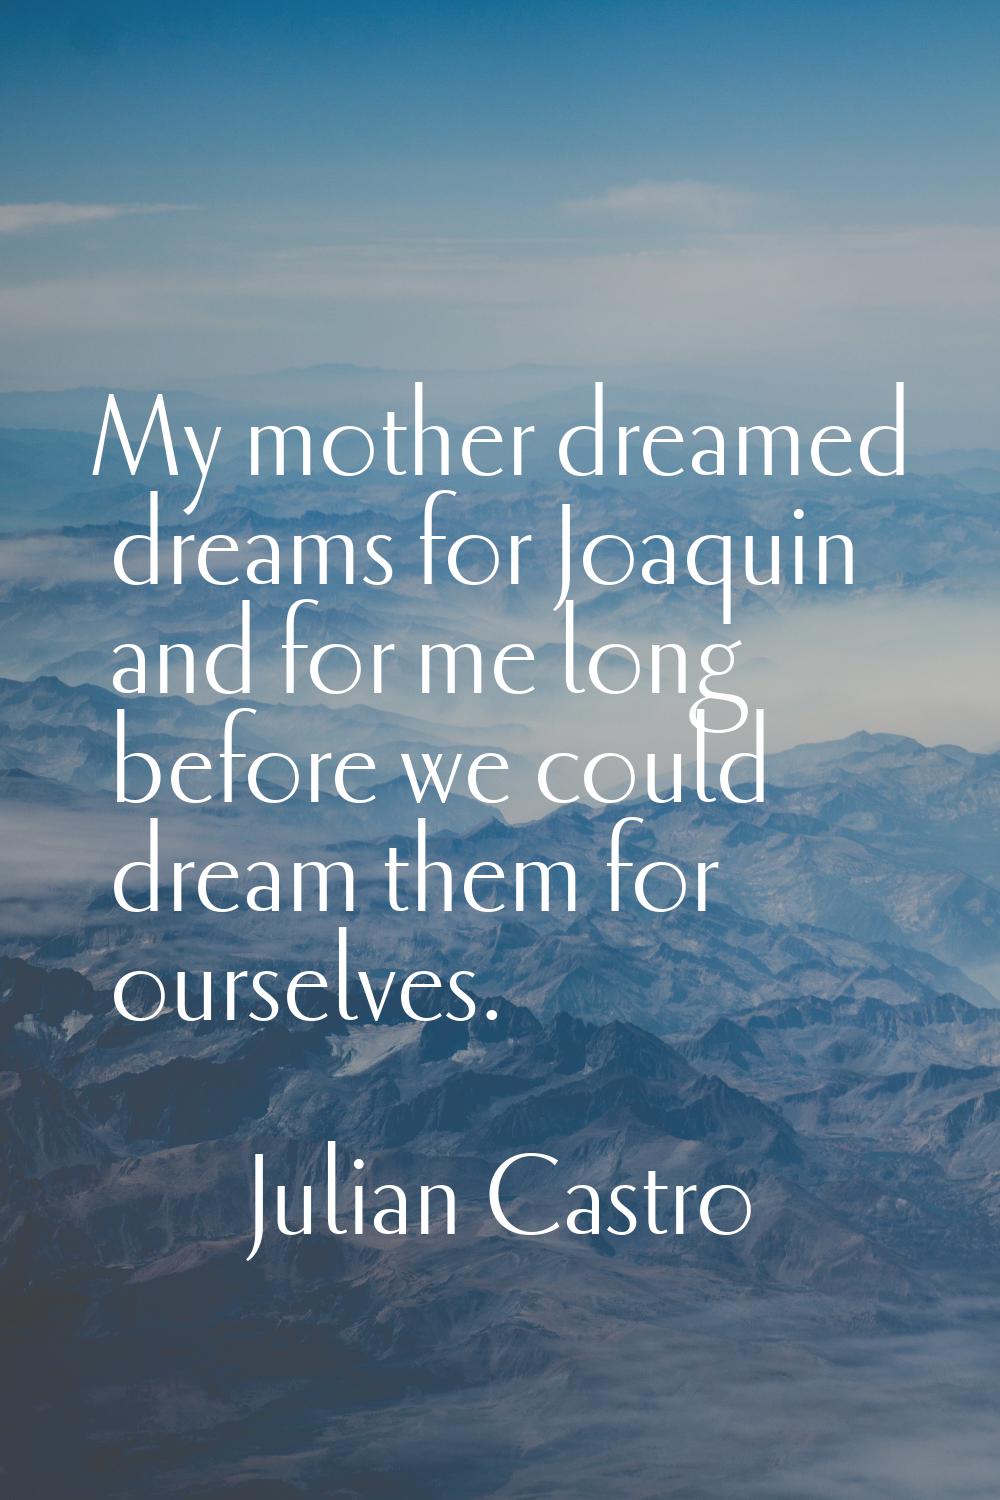 My mother dreamed dreams for Joaquin and for me long before we could dream them for ourselves.